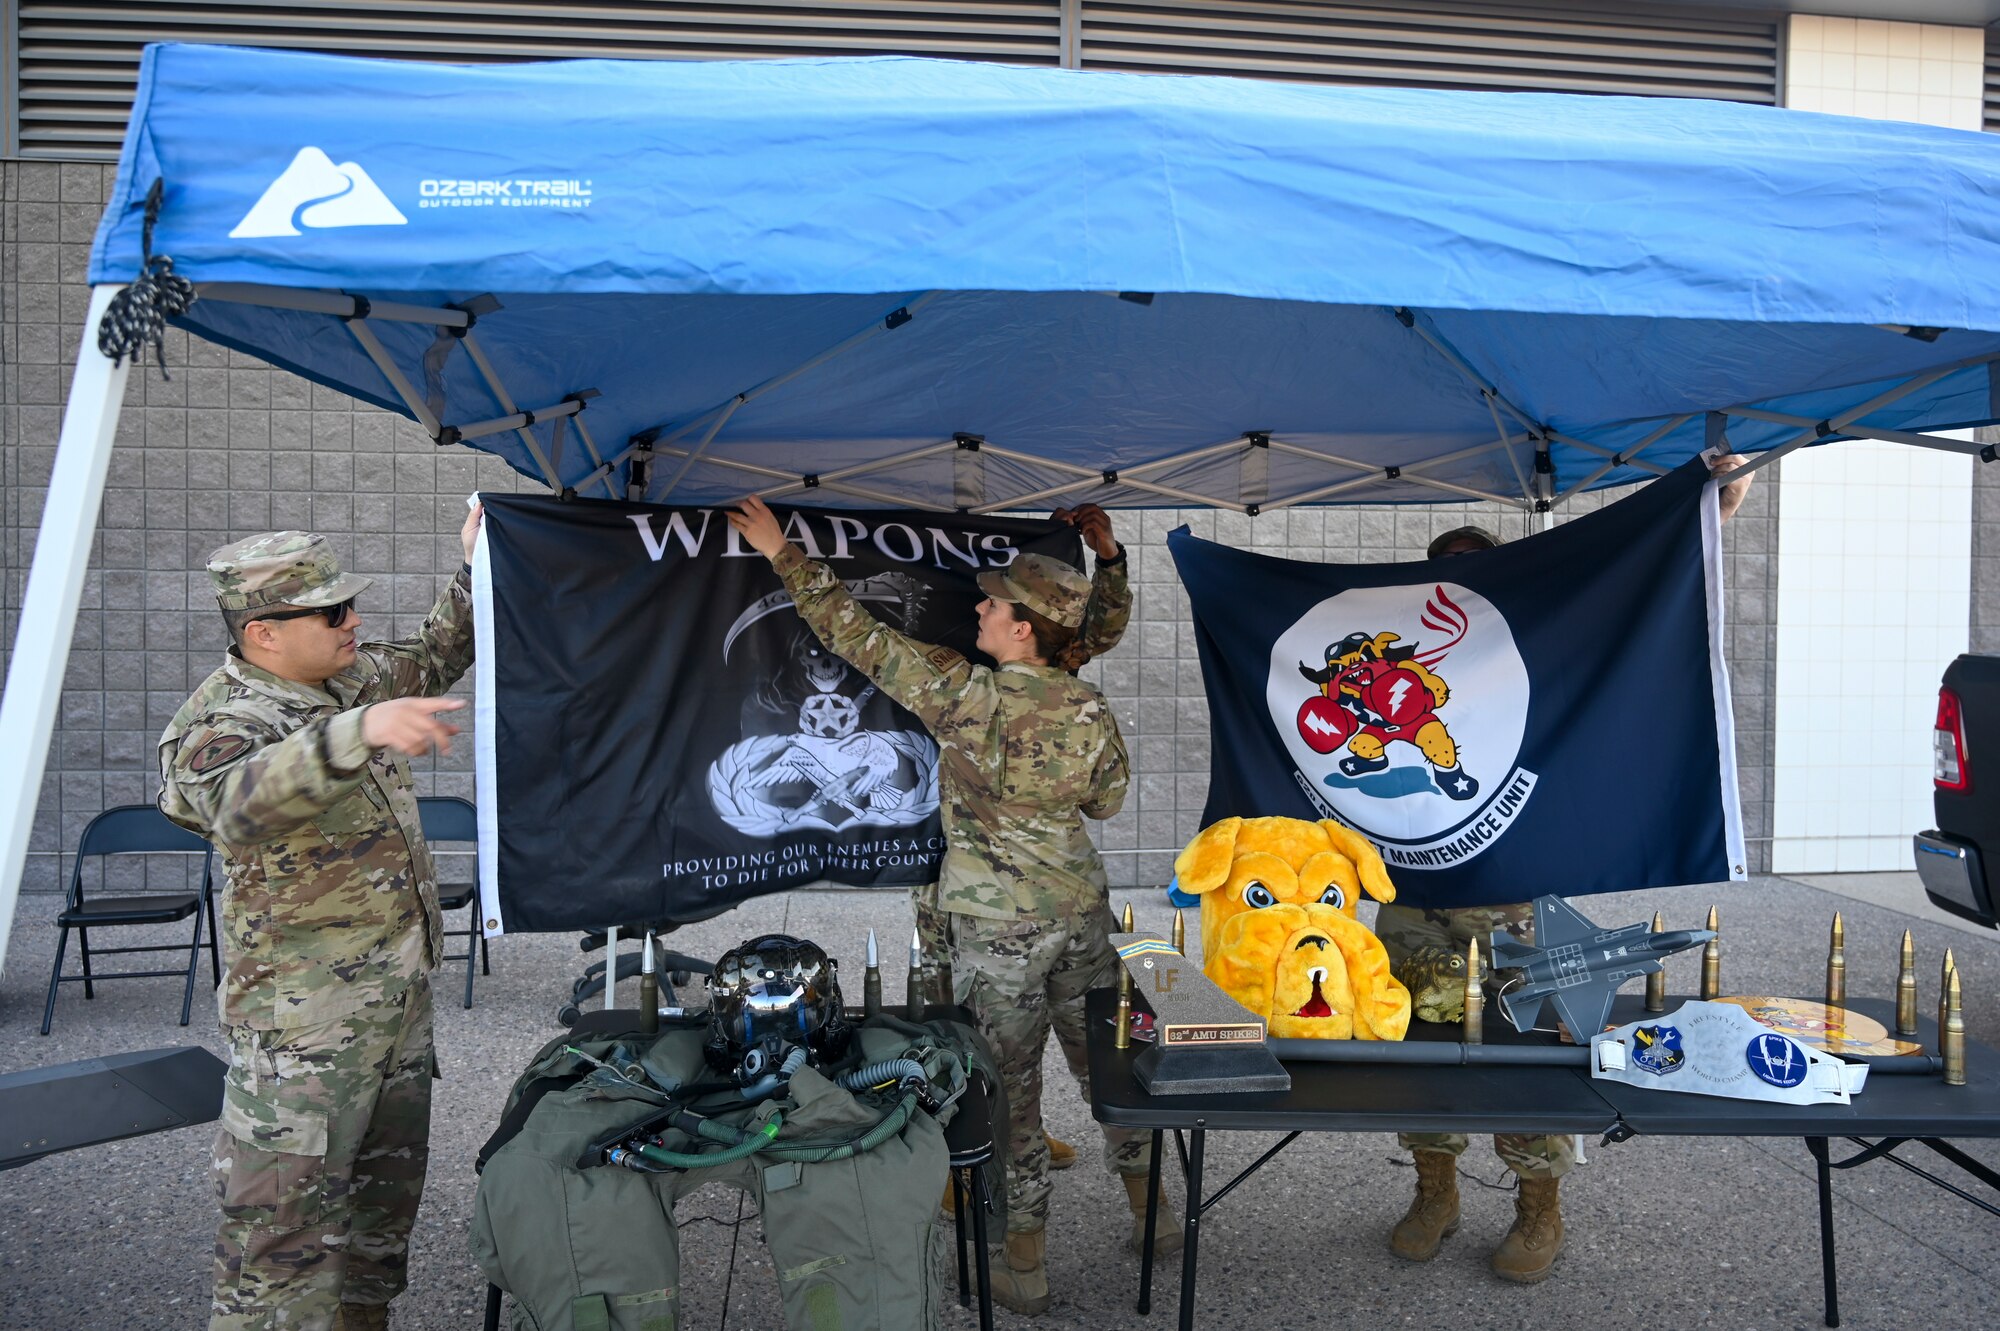 Airmen from the 62nd and 63rd Aircraft Maintenance Units set up their station for a Salute to Service event Nov. 14, 2021, at the State Farm Stadium, Glendale, Arizona.